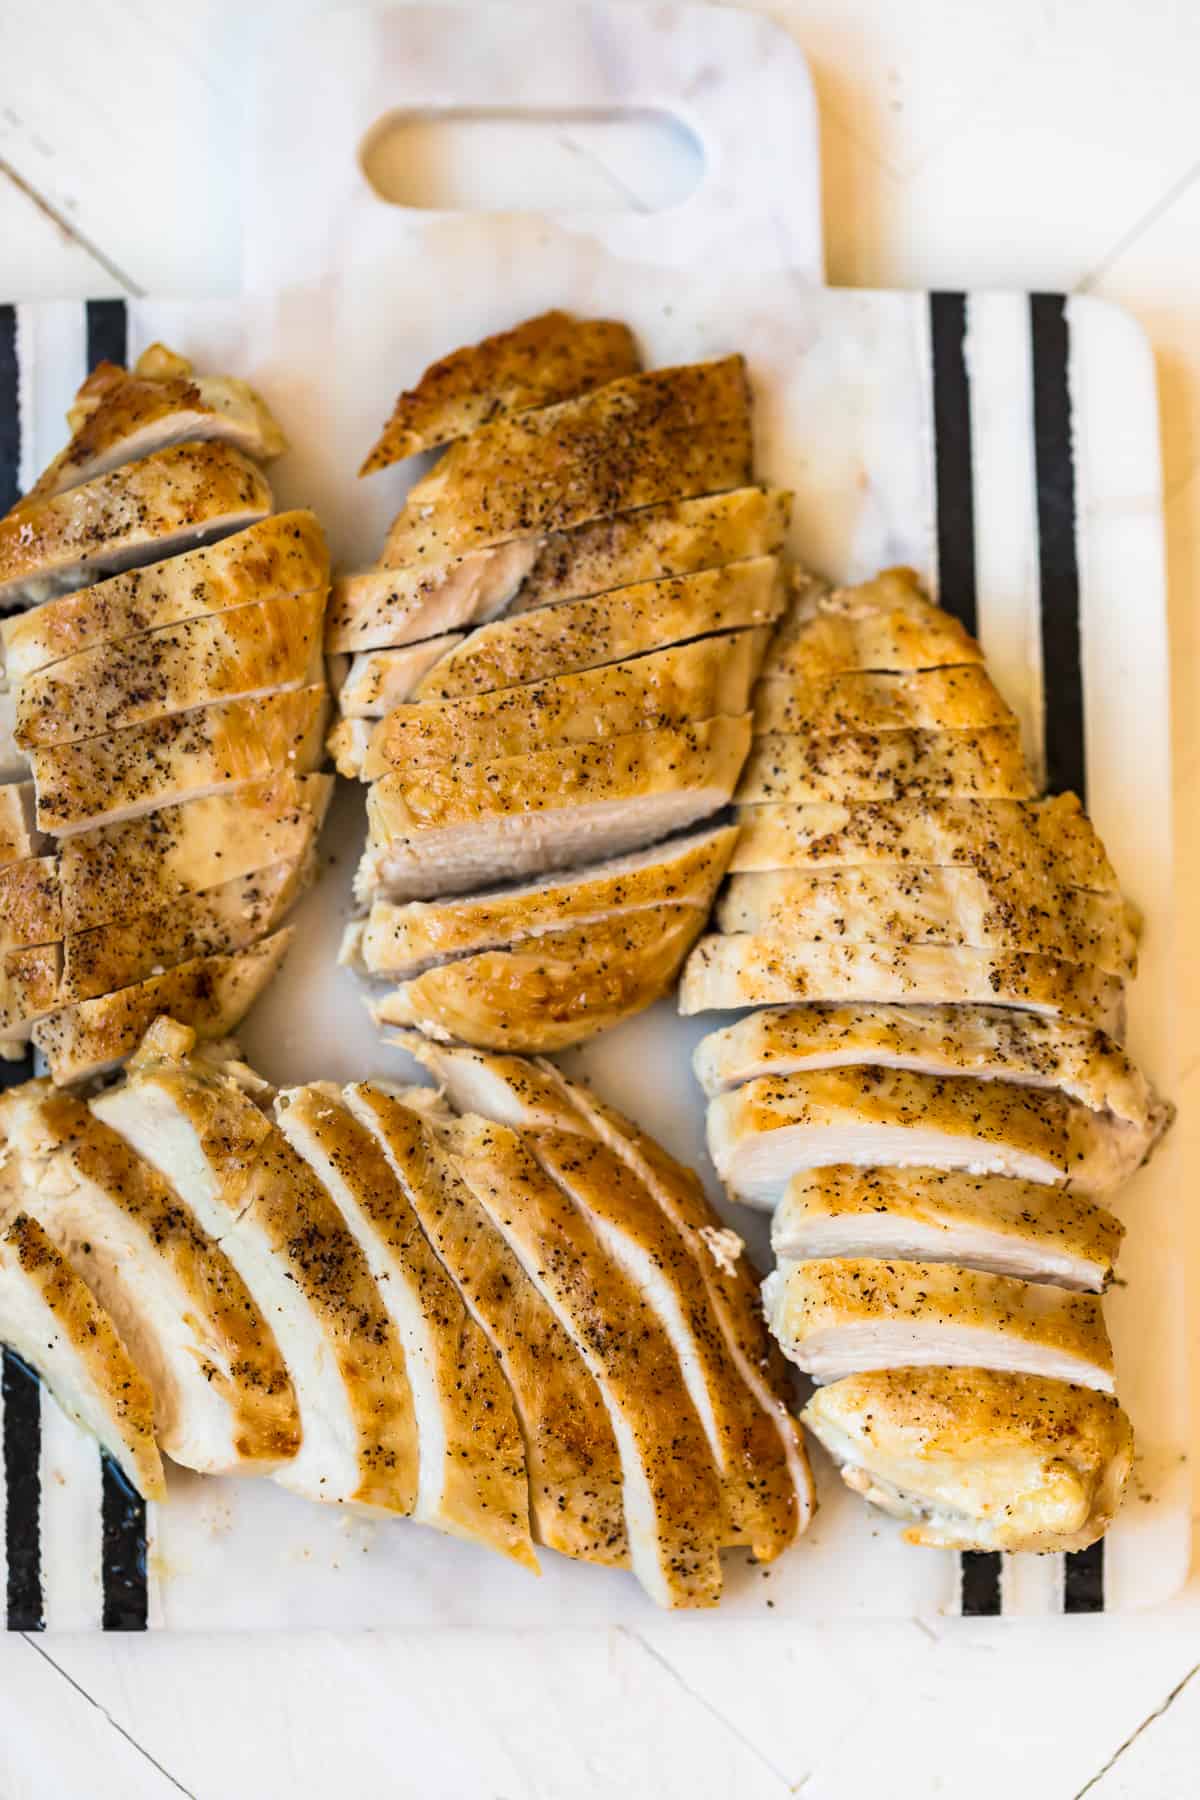 Sliced Pan seared chicken breasts on a plate